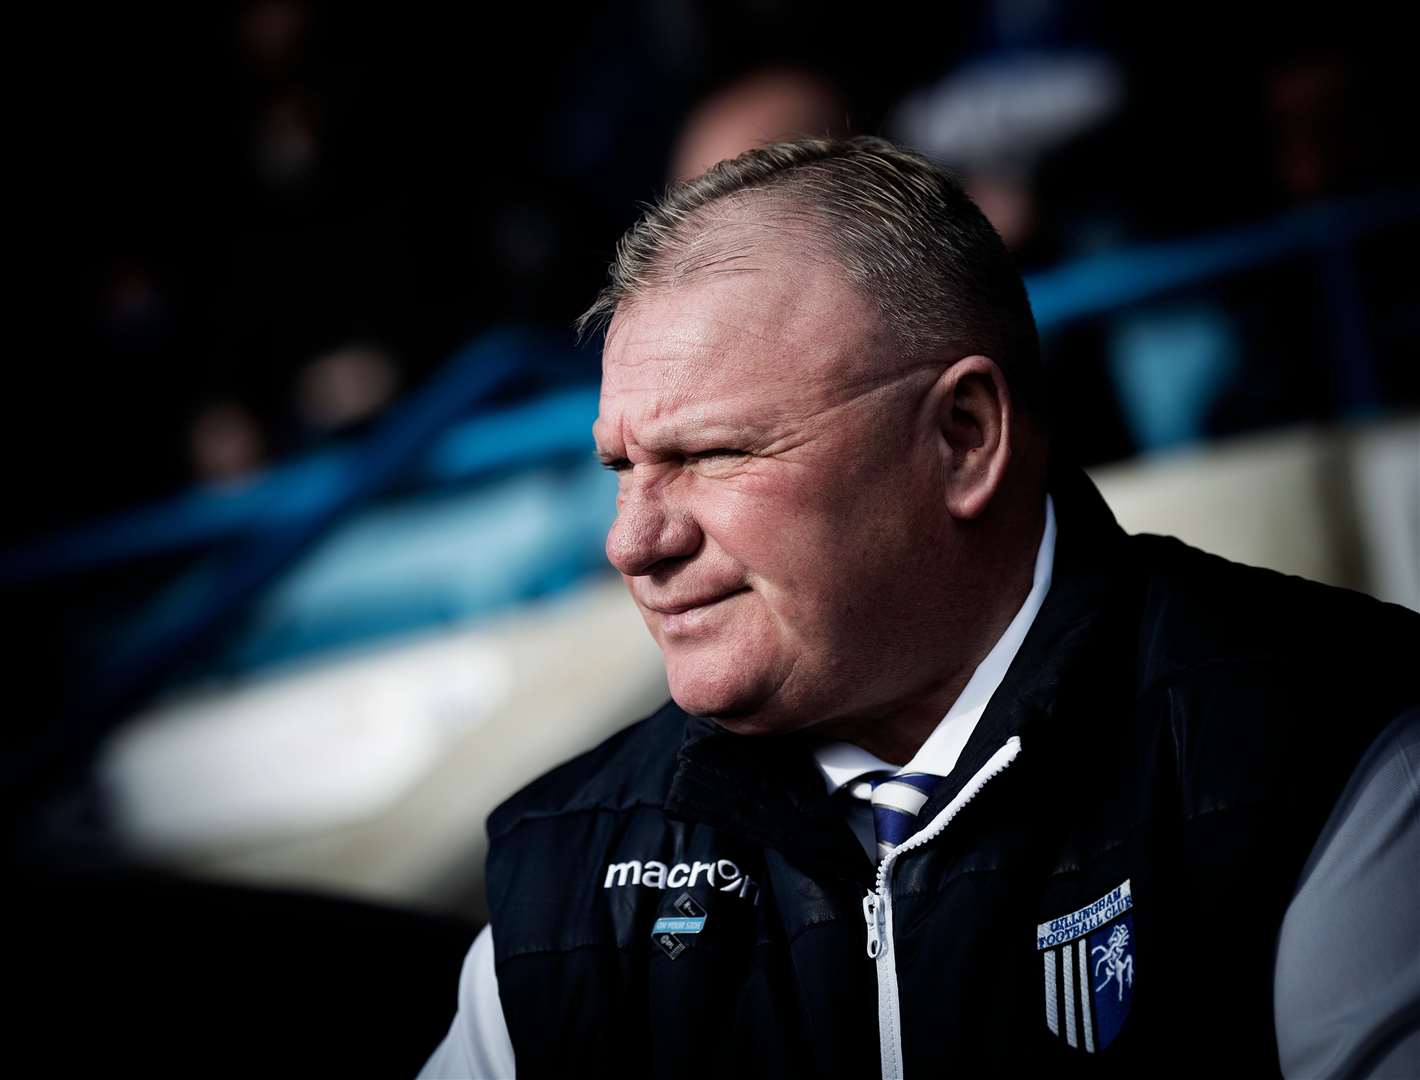 Gillingham manager Steve Evans would love to be back playing but is cautious about returning too quickly